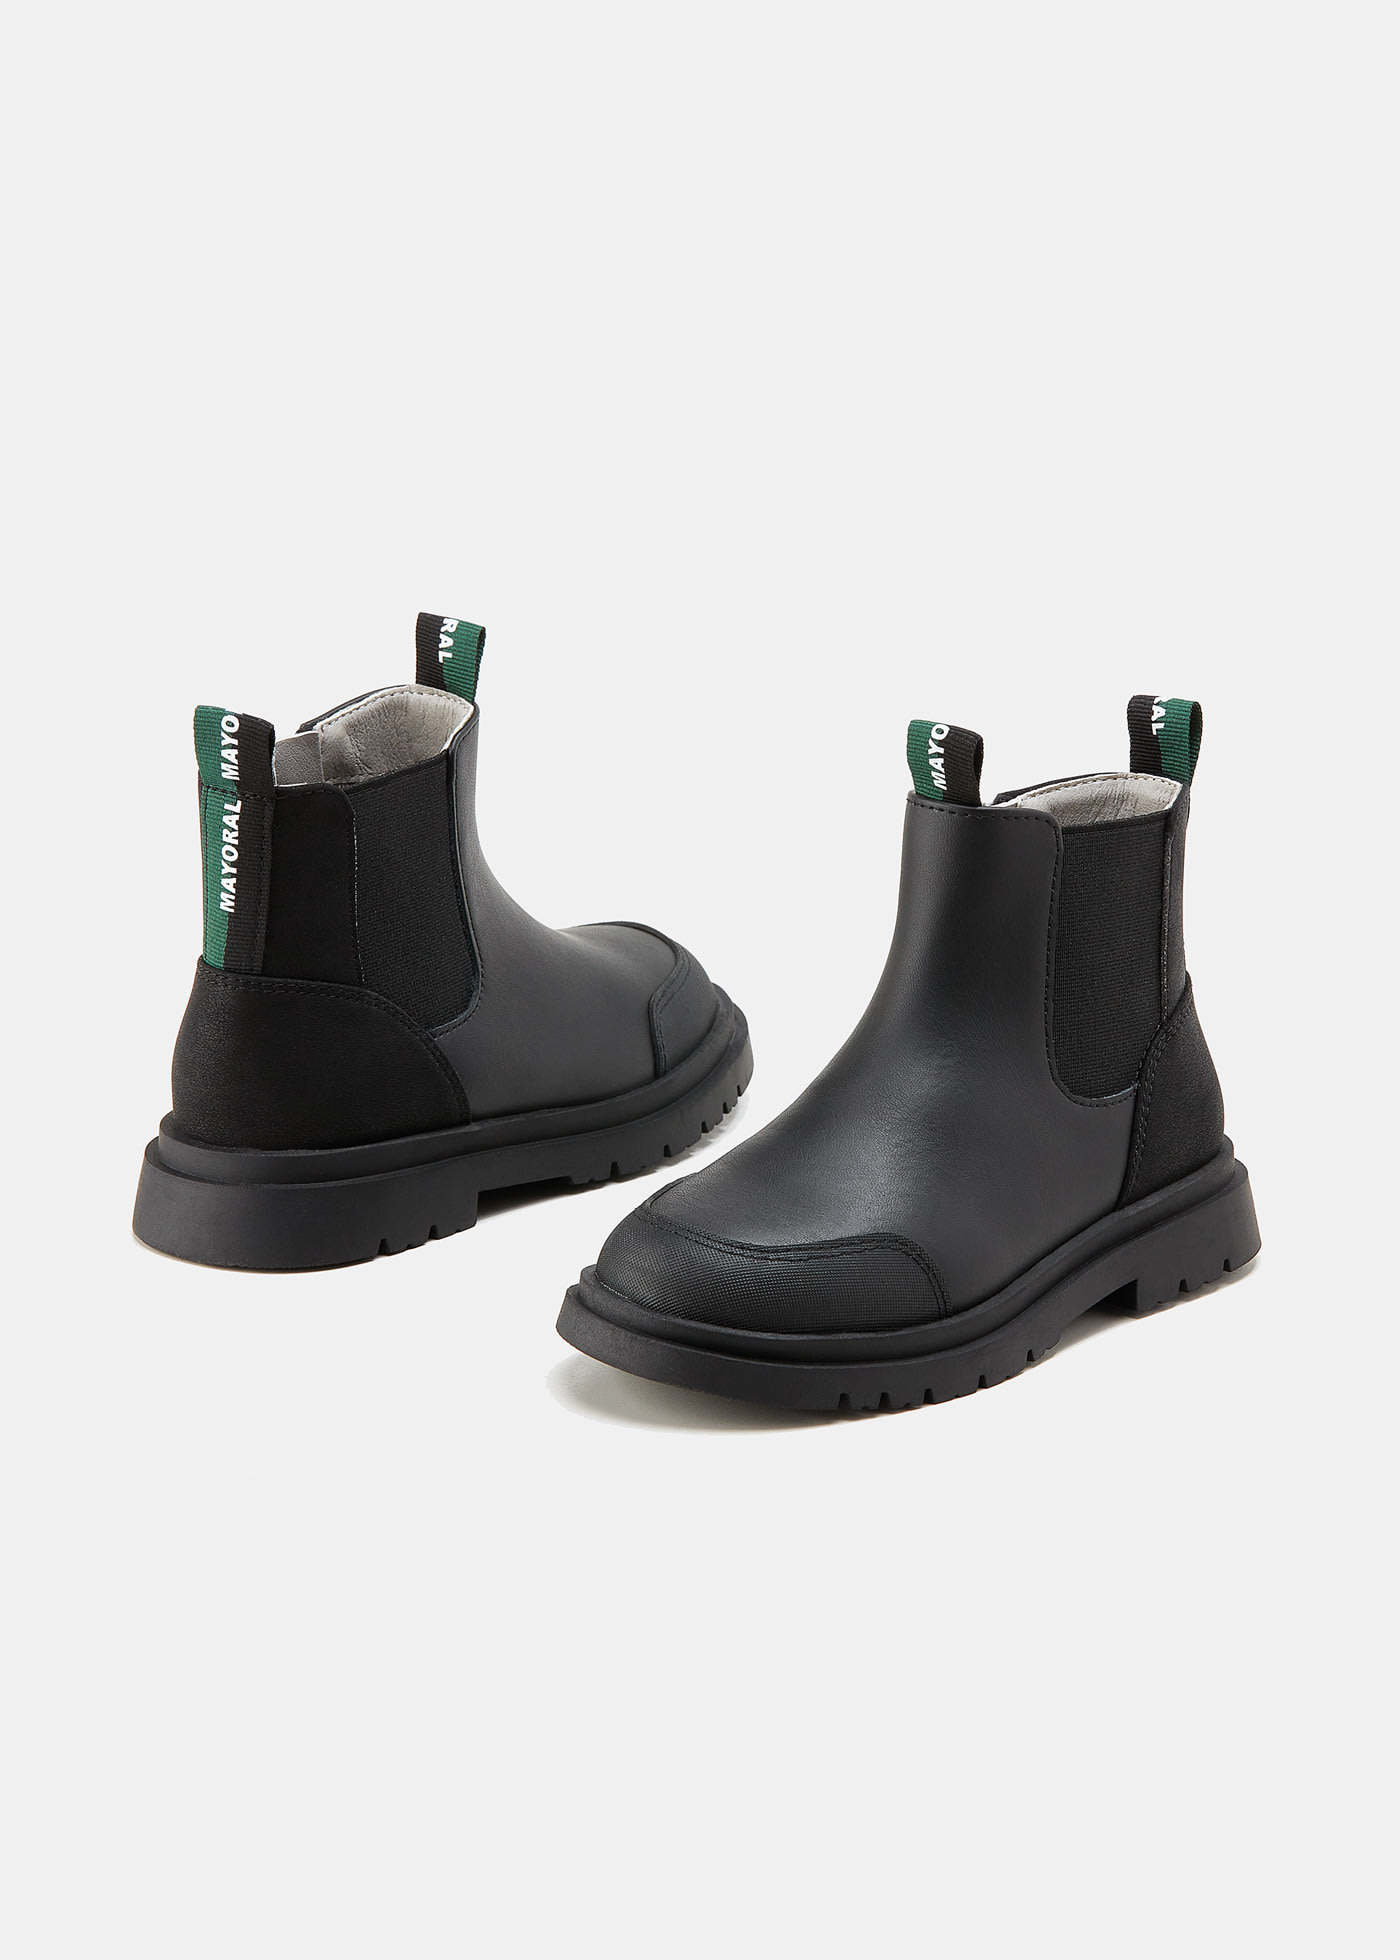 Boy Chelsea boots sustainable leather